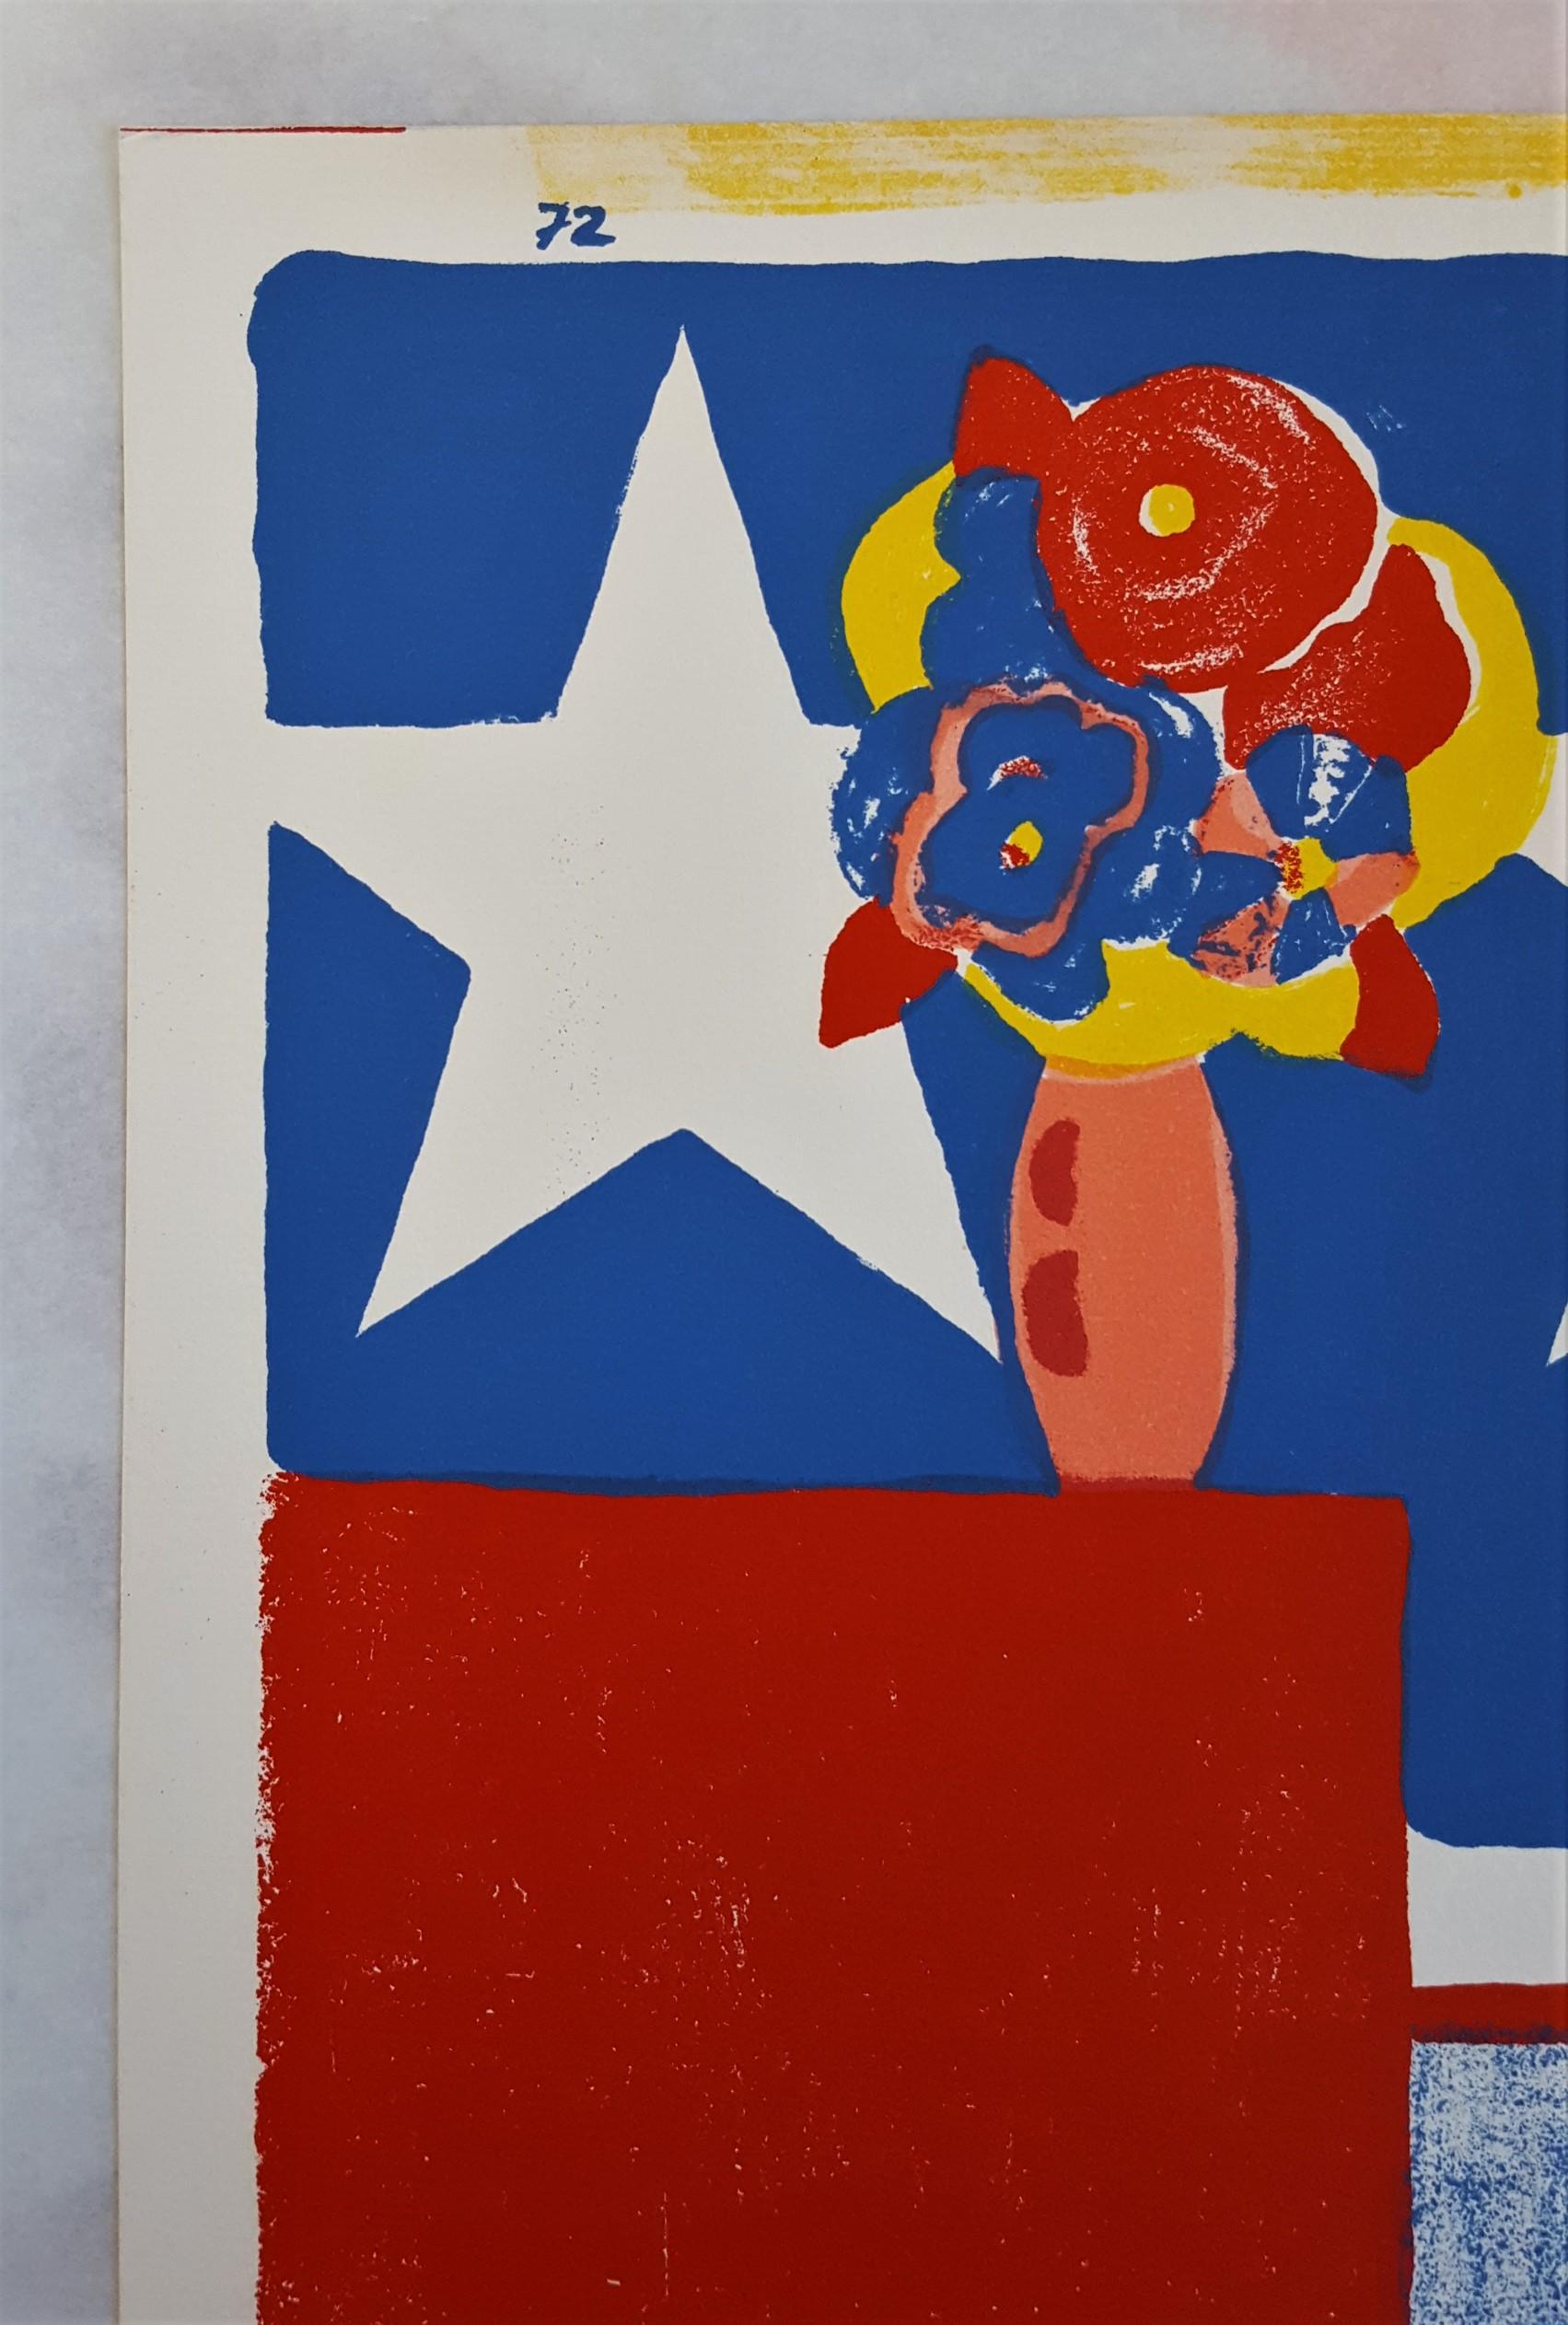 An original lithograph on white wove paper by American artist Tom Wesselmann (1931-2004) titled 